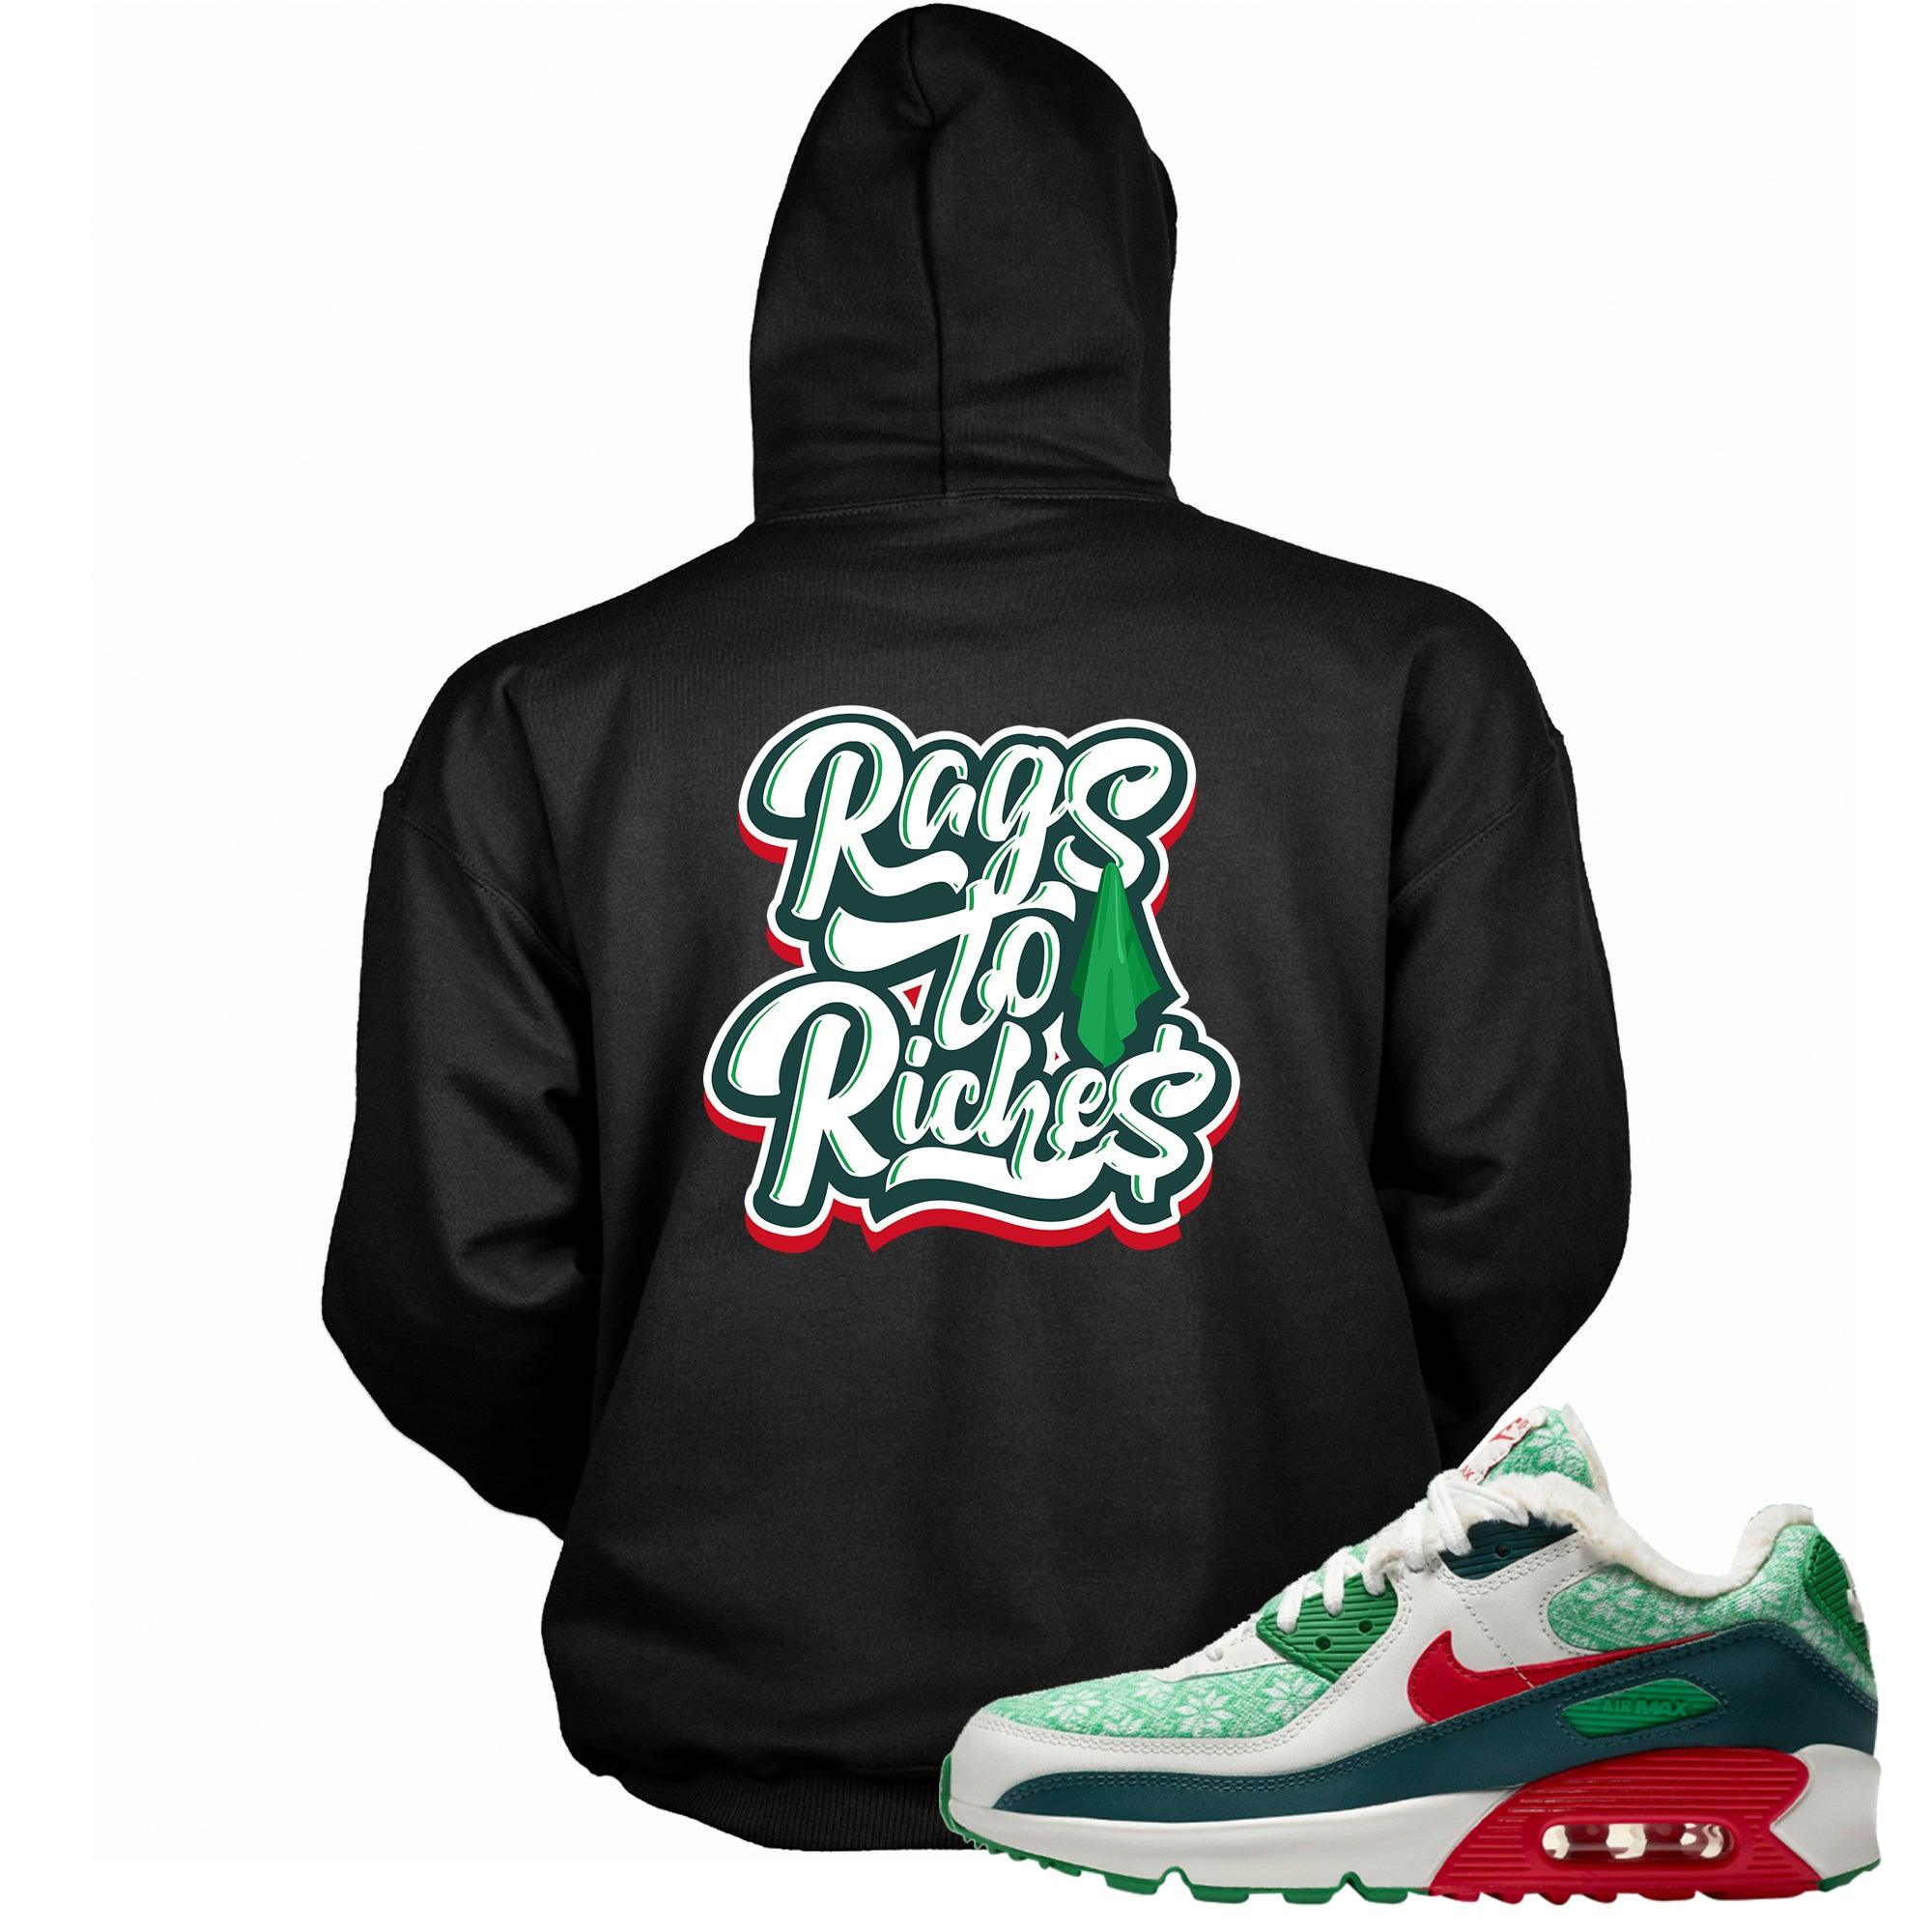 Black Rags To Riches Hoodie AIR MAX 90 NORDIC CHRISTMAS photo